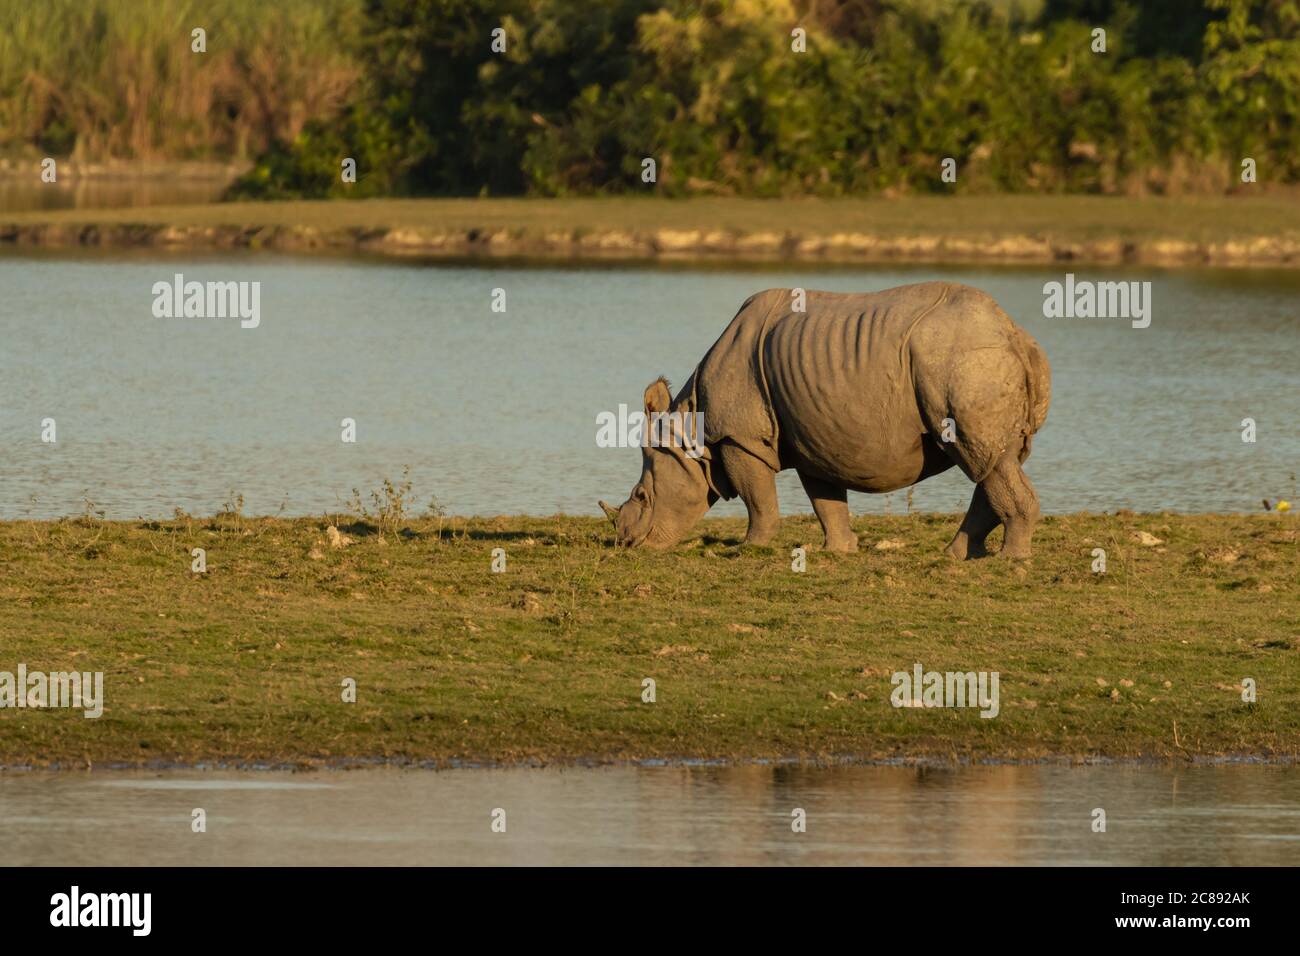 A single horn rhino also called one horn rhino grazing grass in the wet lands of Assam India at Kaziranga national park Stock Photo